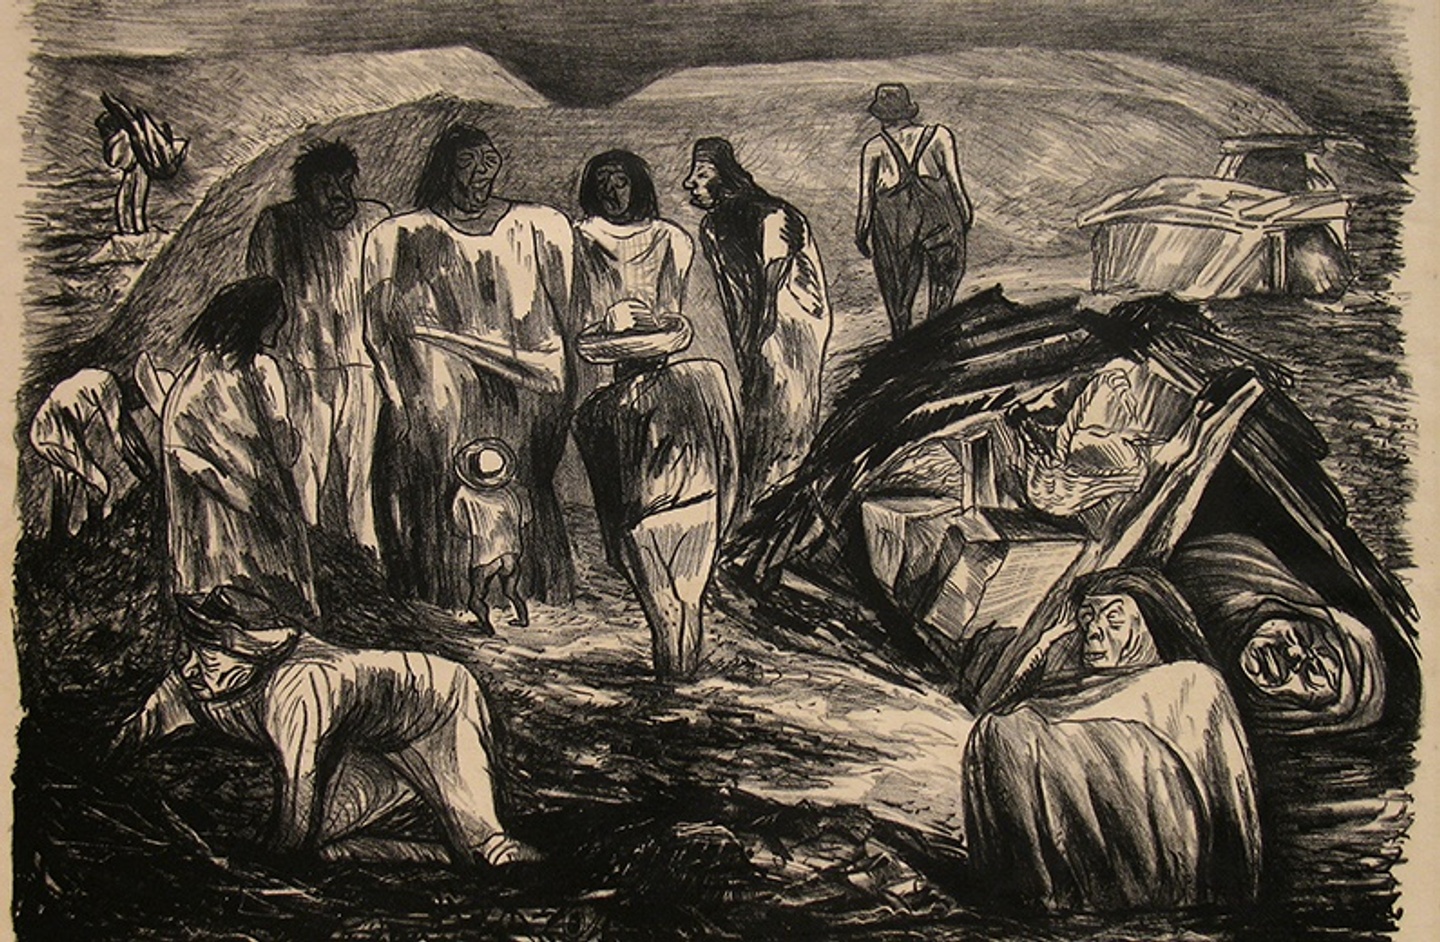 A roughly drawn landscape in black and white of a dumping ground with human figures, alive and dead